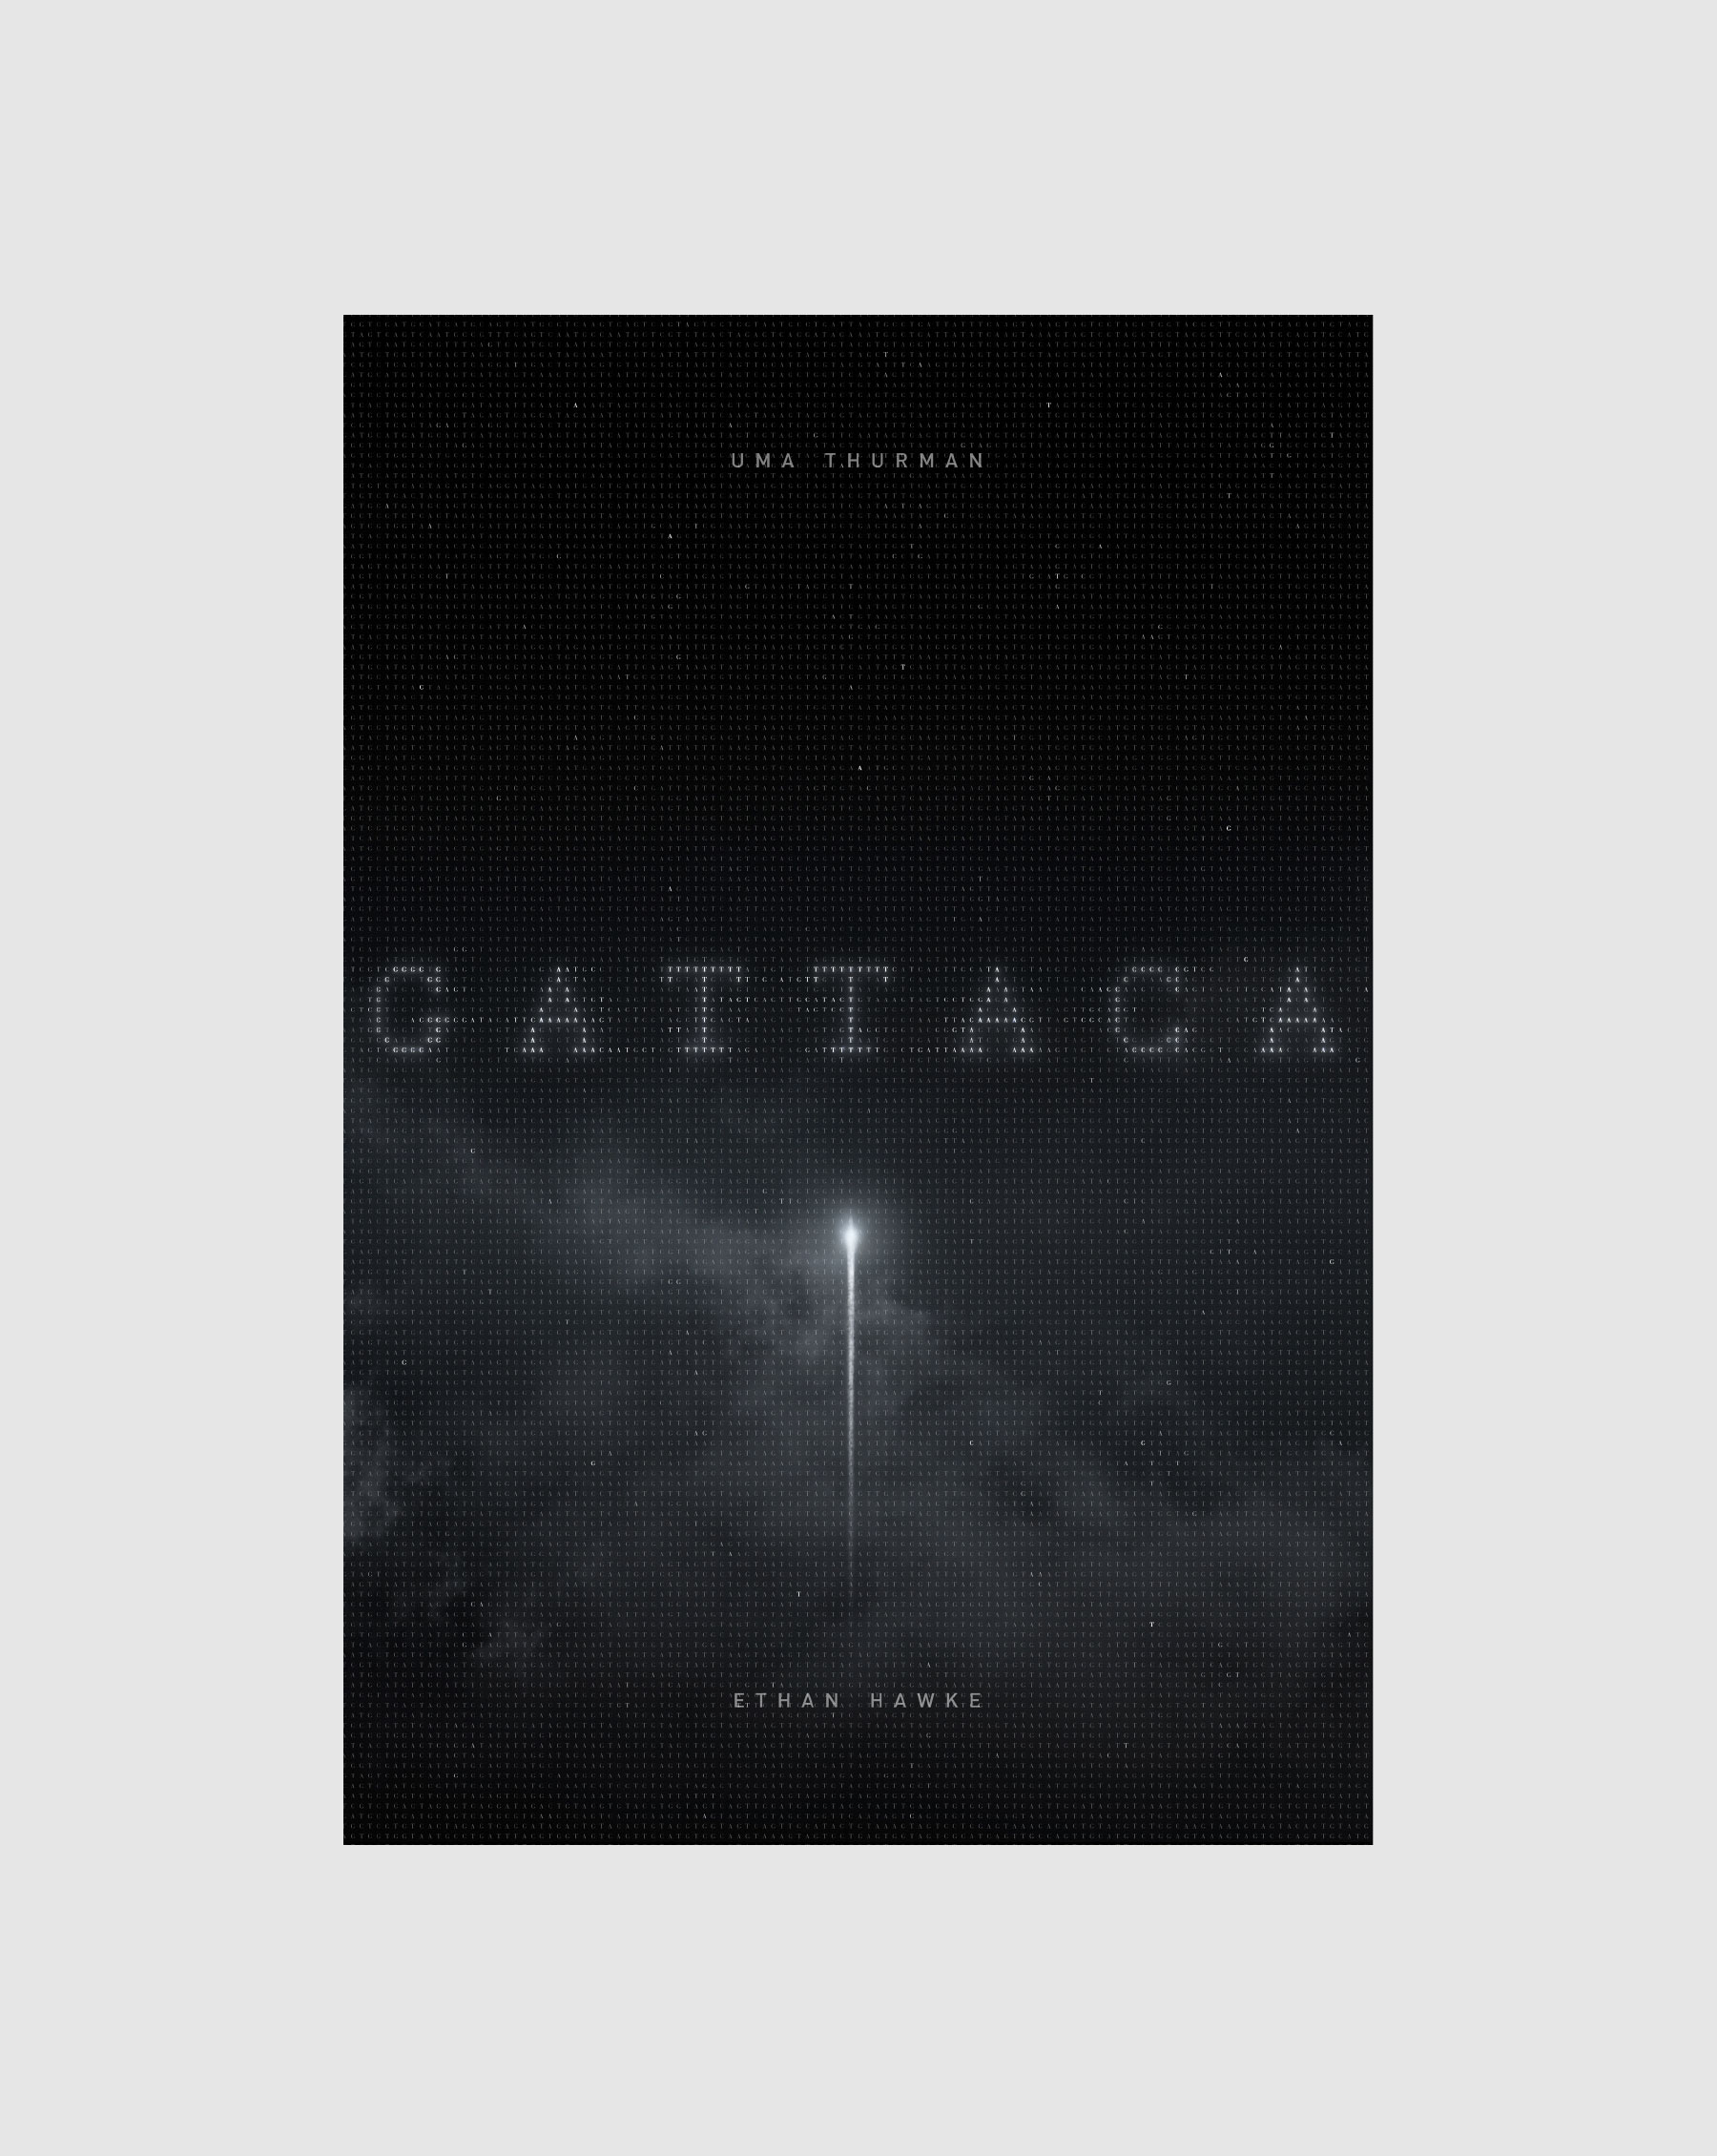 Gattaca film poster showing a rocket soaring into space against a grid of DNA code that make up the typography and the stars